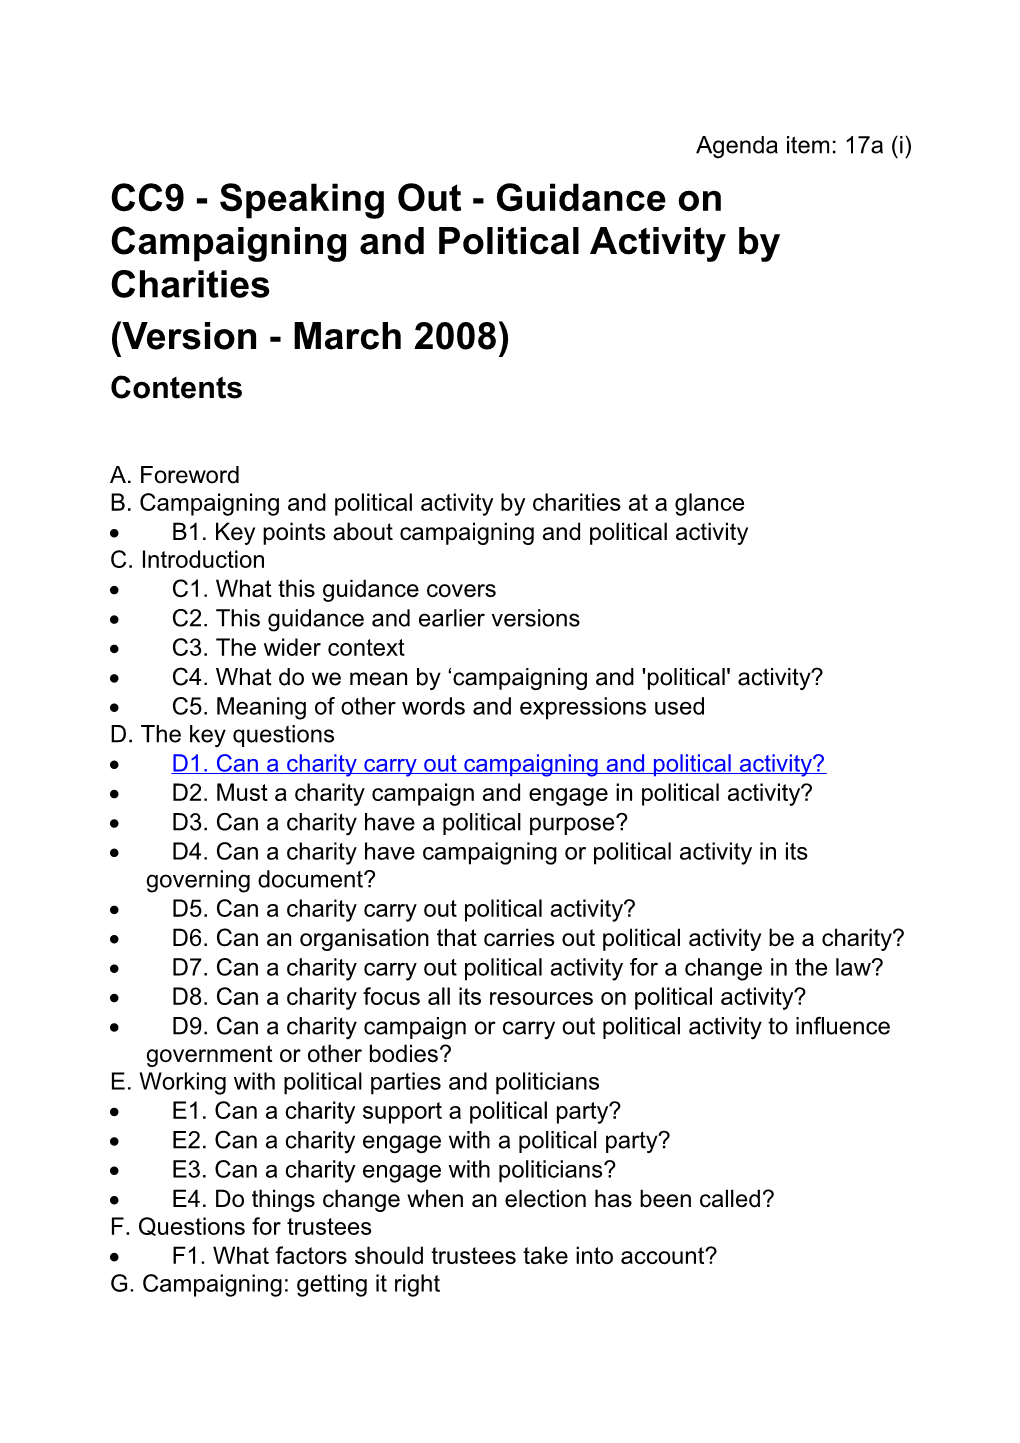 CC9 - Speaking out - Guidance on Campaigning and Political Activity by Charities